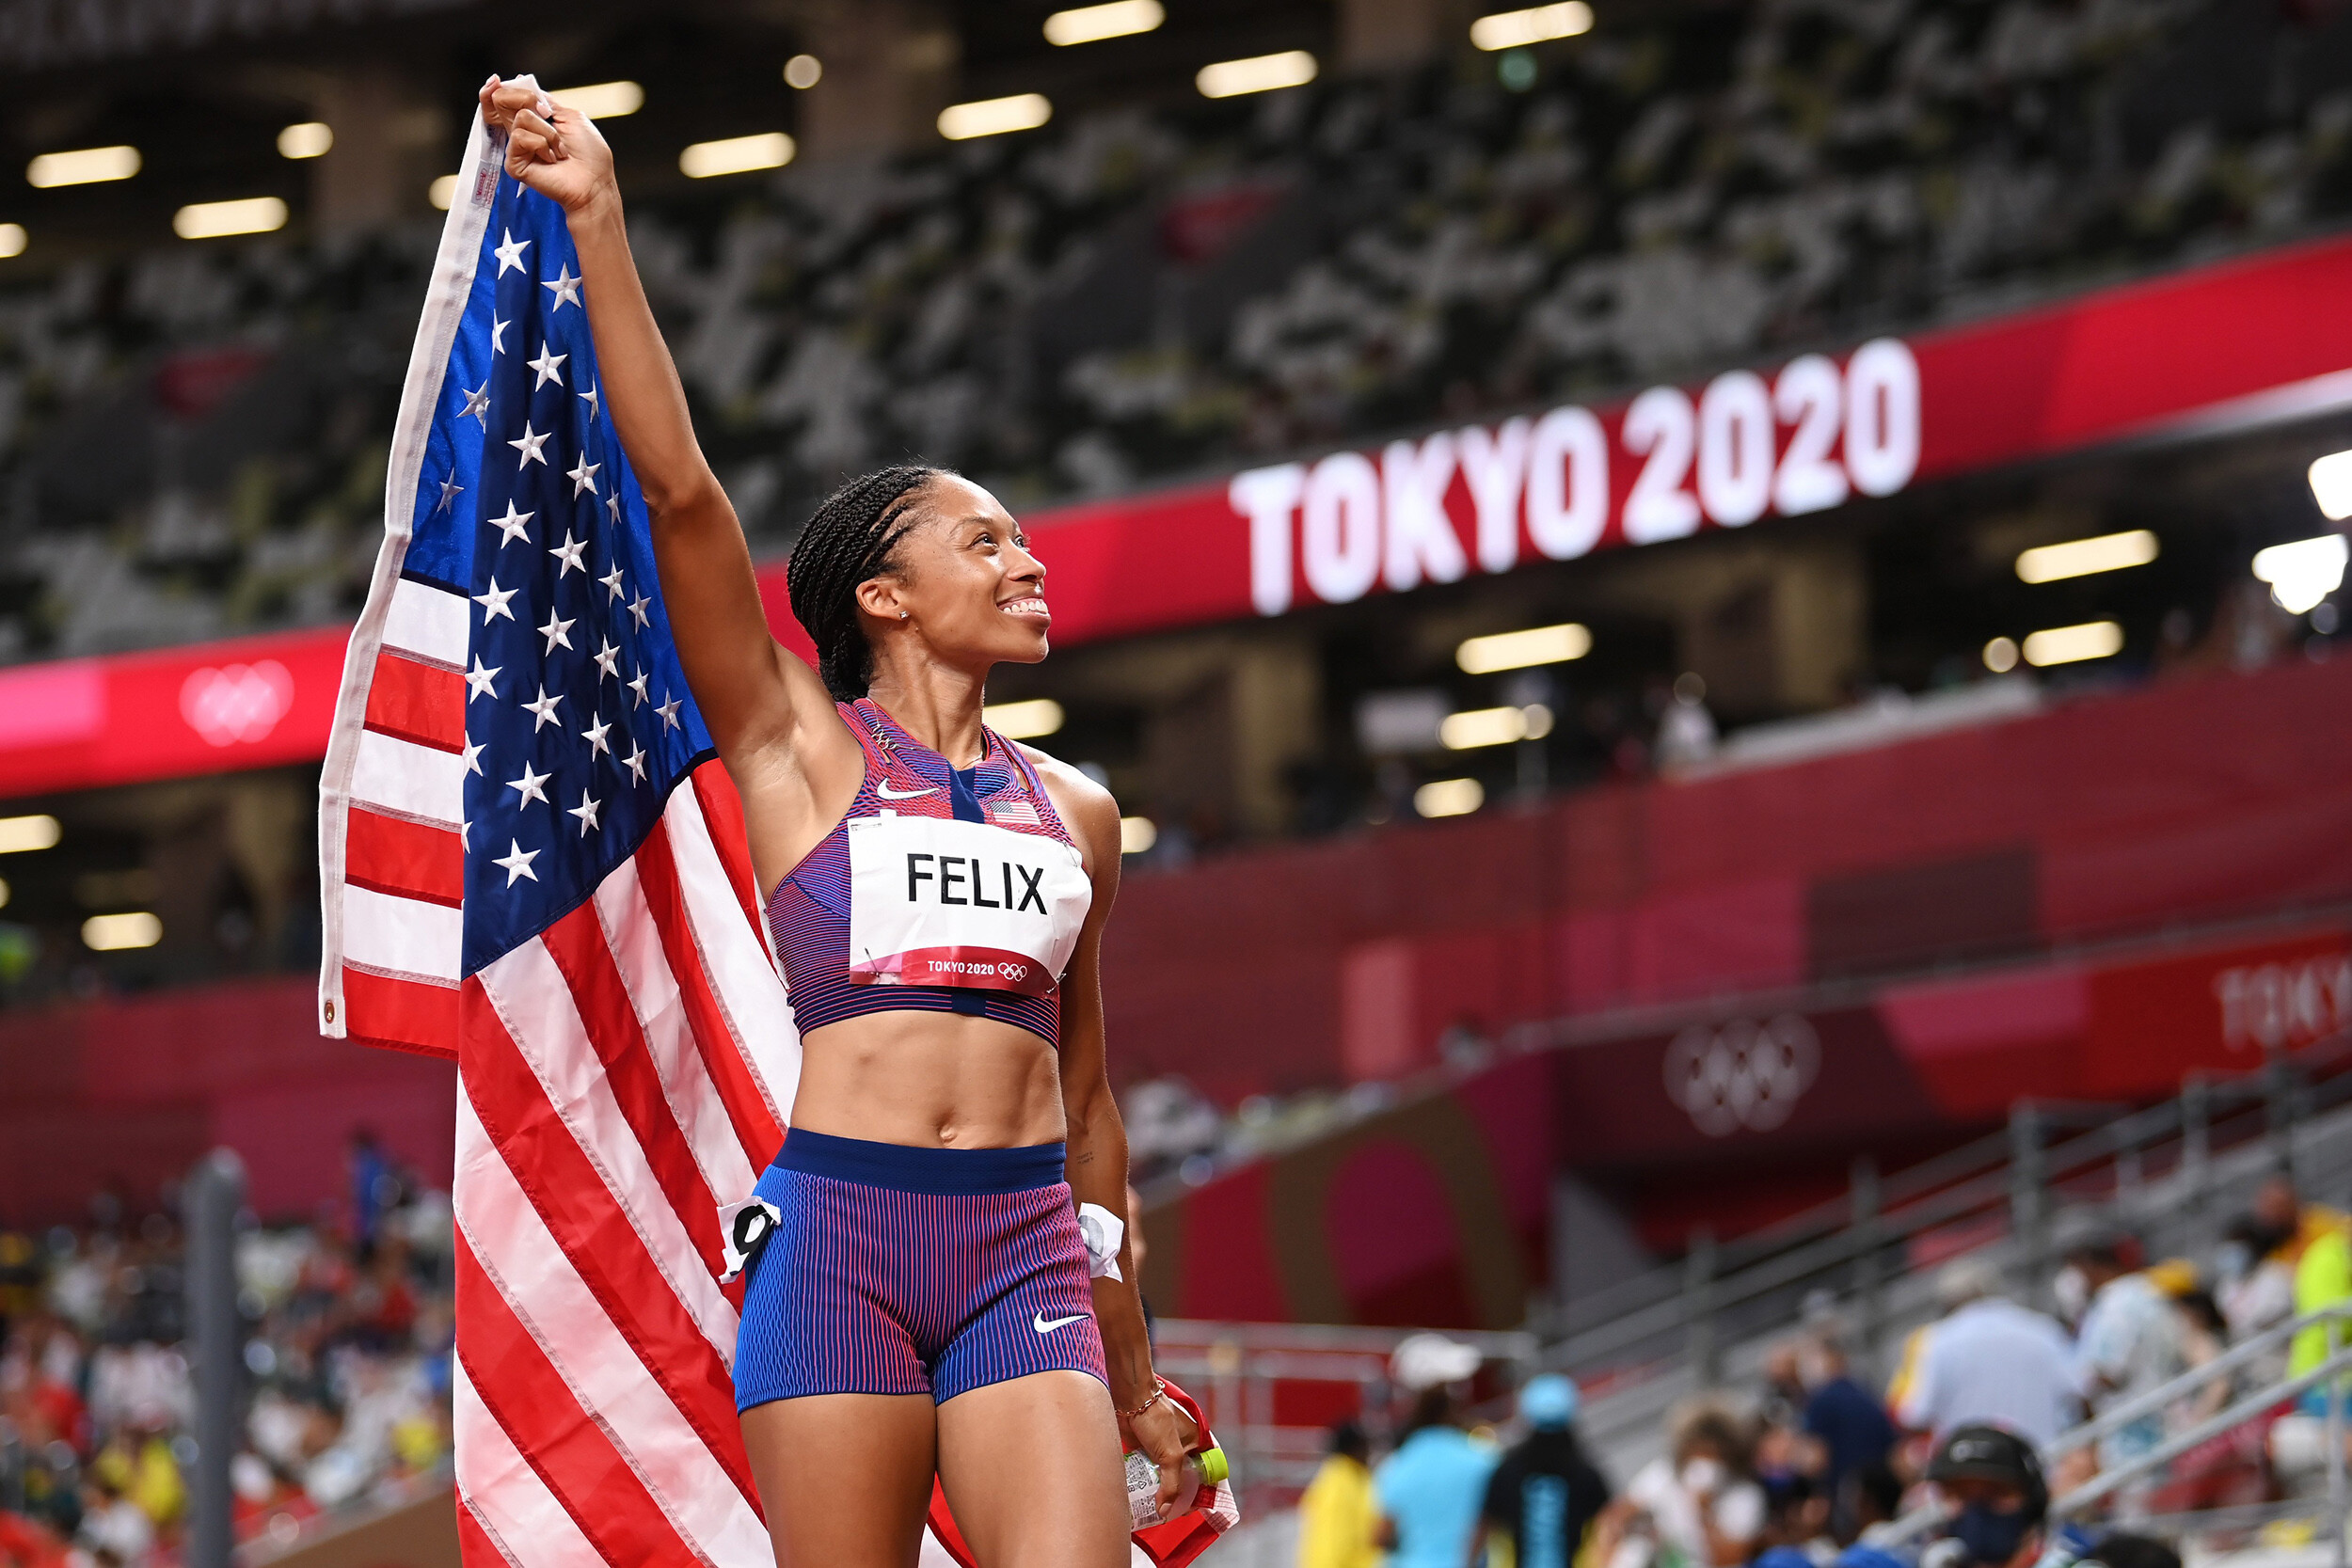 Allyson Felix: The winner of the bronze medal in the Women's 400m Final at the Tokyo Olympic Games on Aug. 6, 2020. 2500x1670 HD Wallpaper.